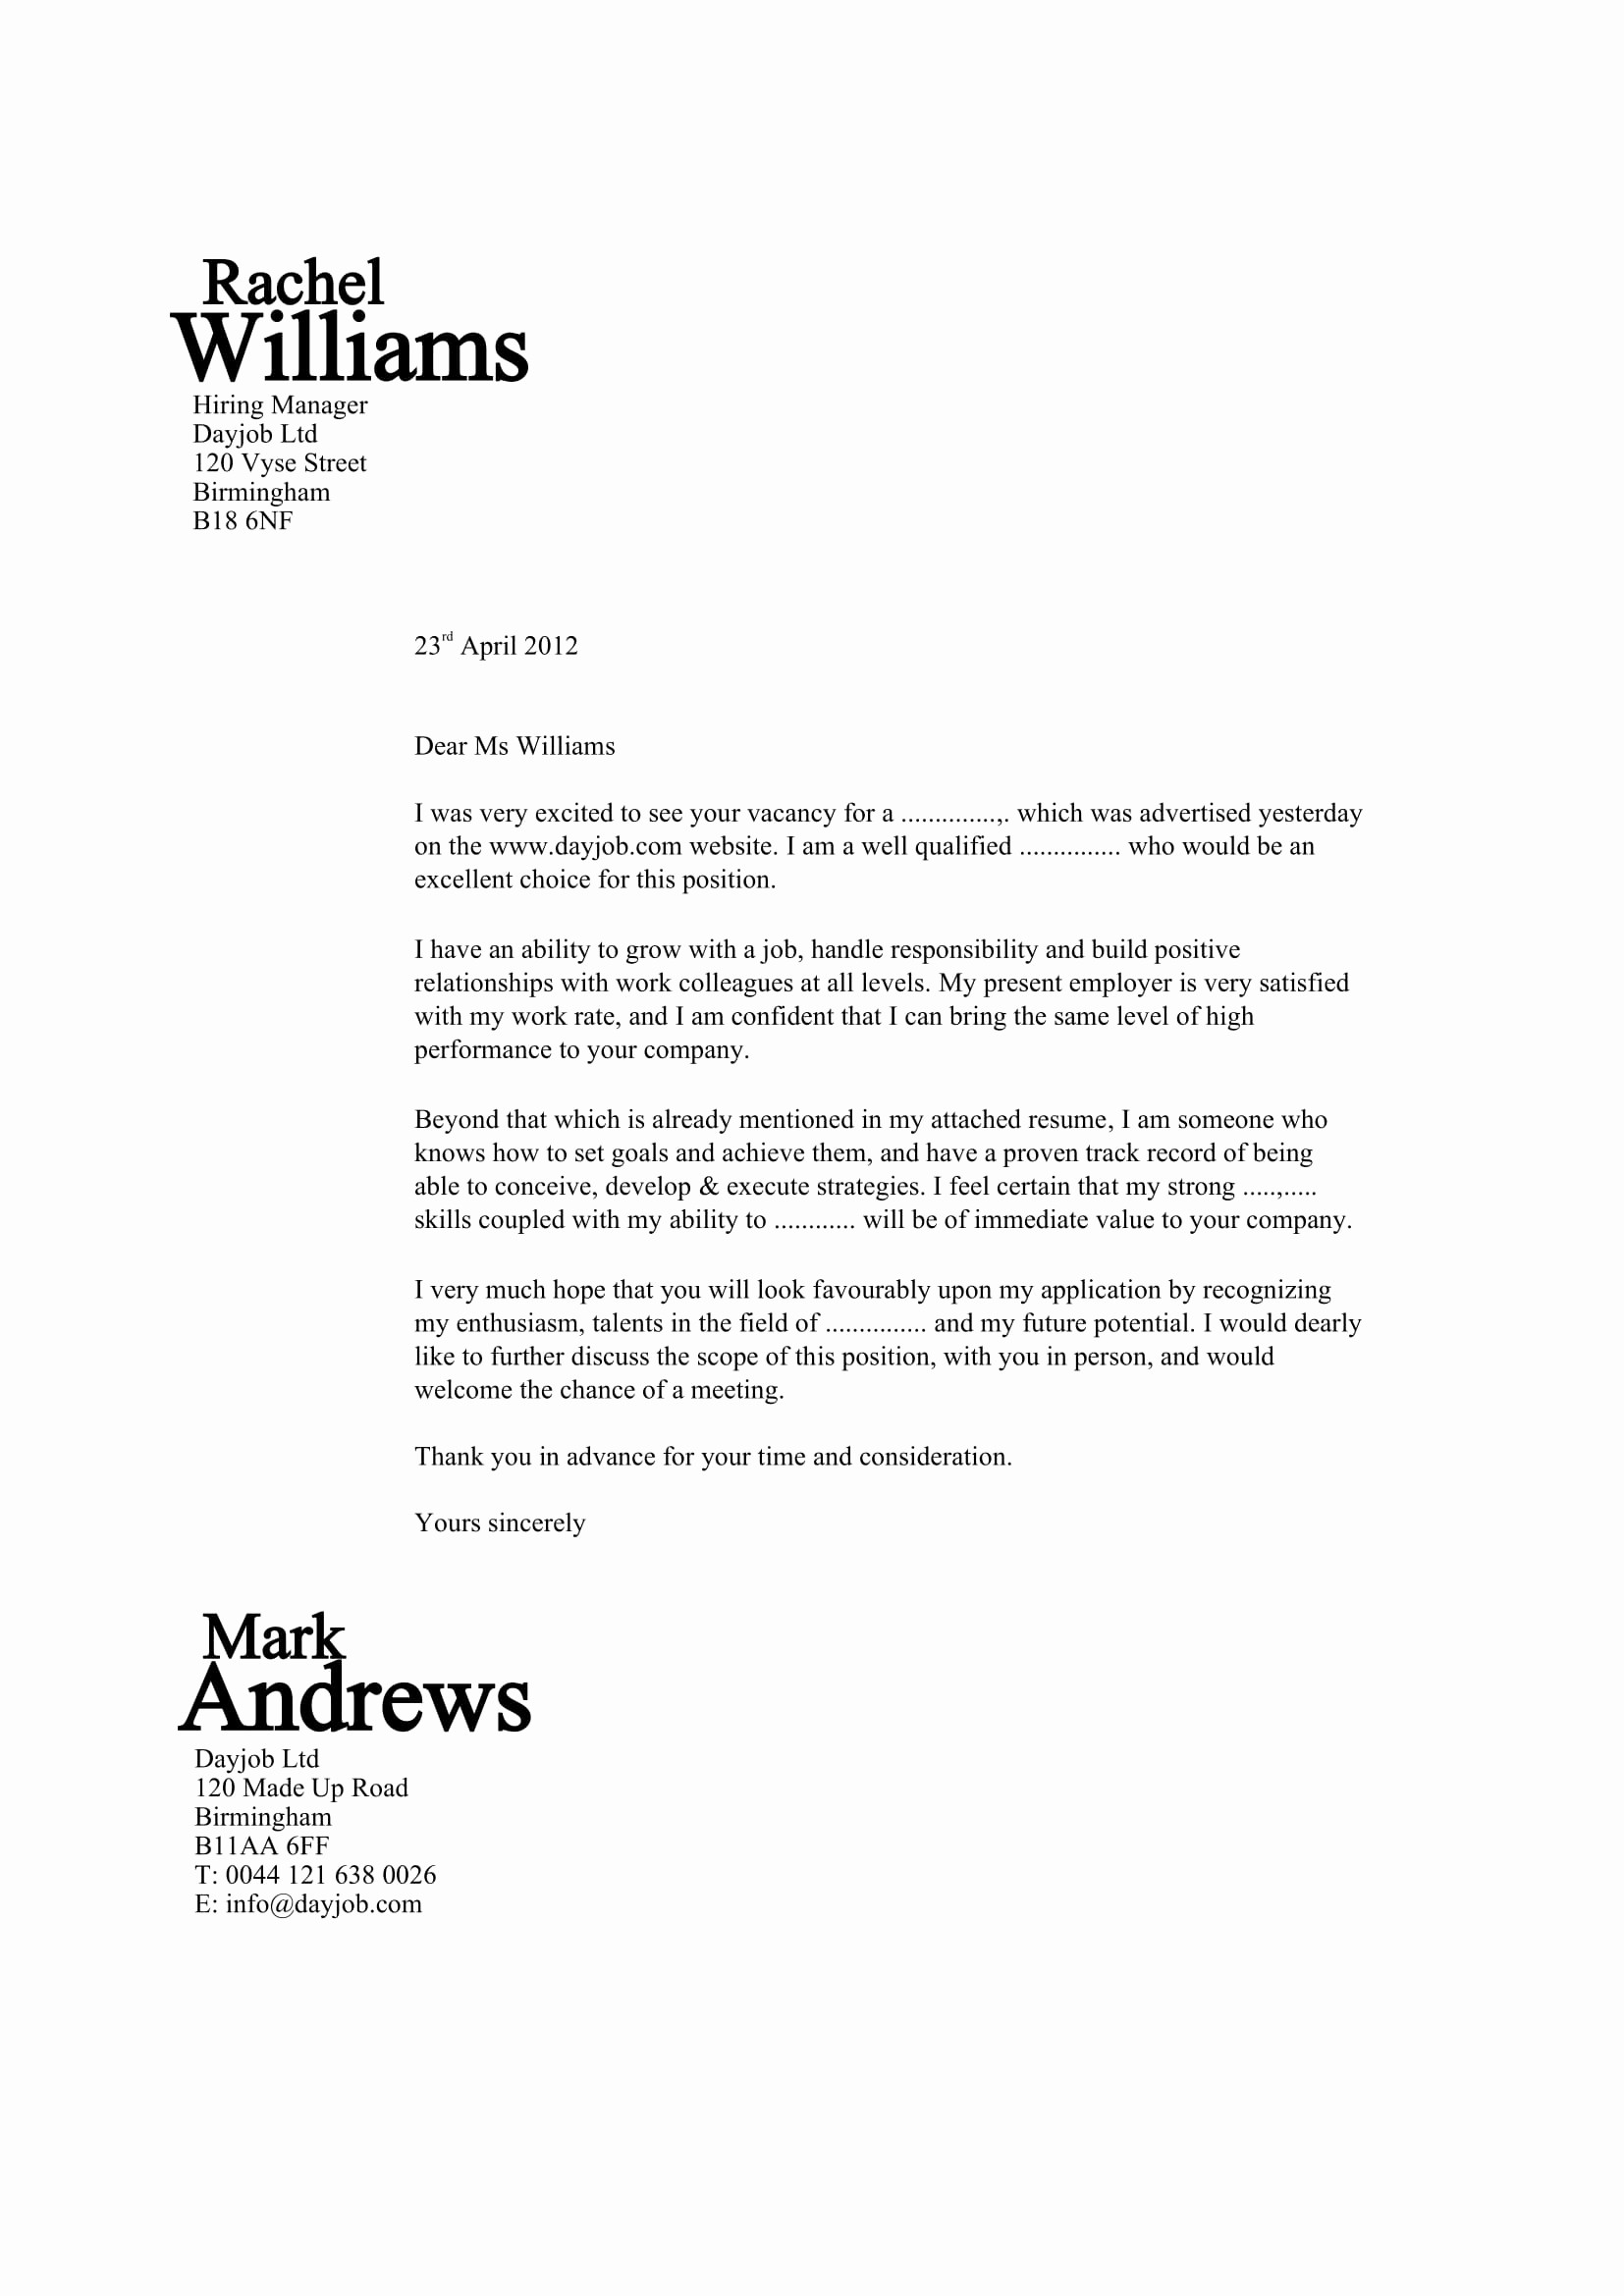 Templates for Cover Letters Free Luxury 32 Best Sample Cover Letter Examples for Job Applicants